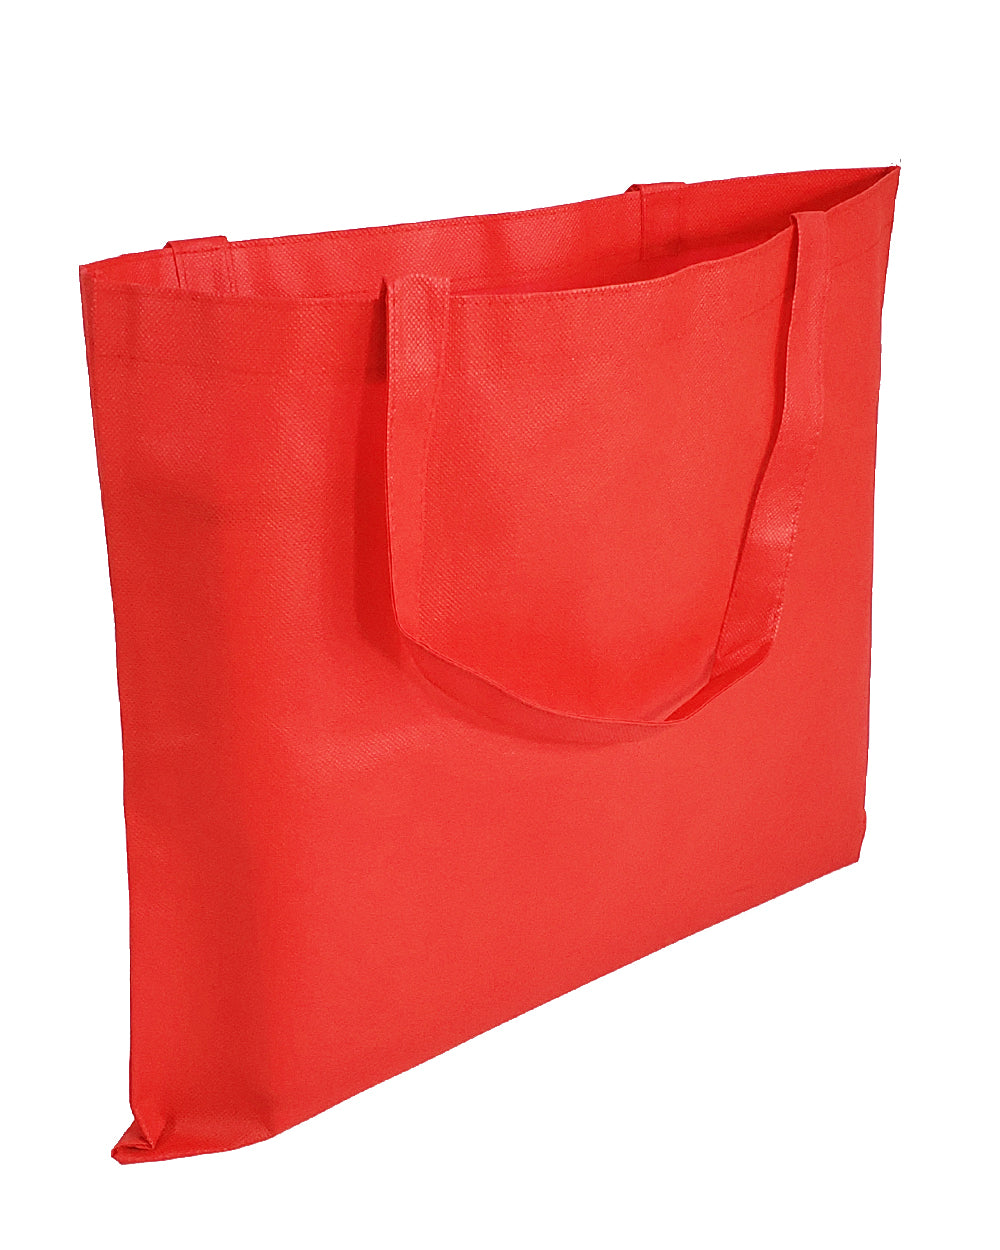 350 ct Large Tote Bags / Convention Tote Bag - By Case